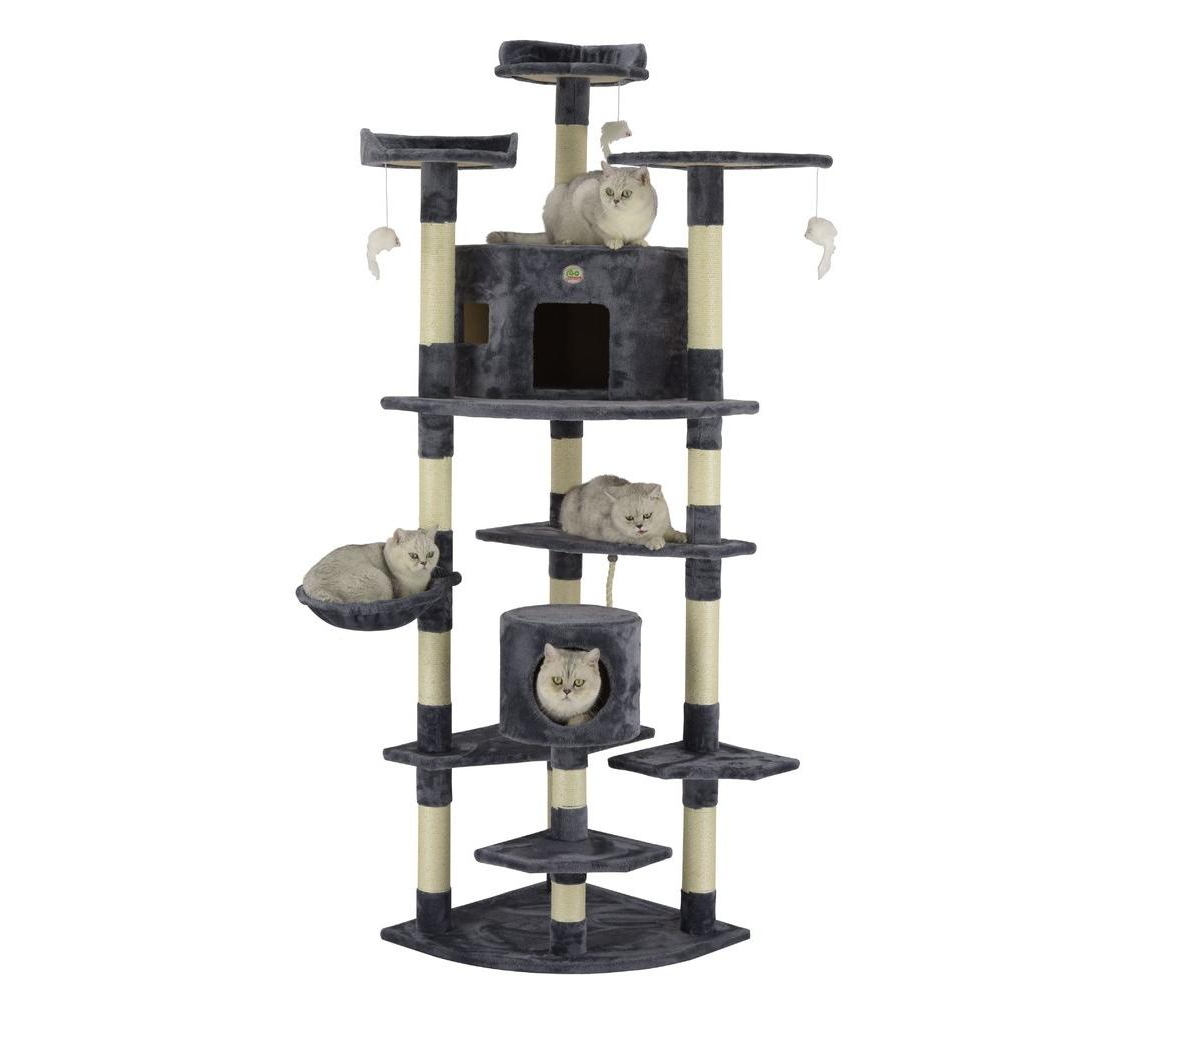 80 in. Classic Cat Tree House Furniture with Sisal Scratching Post - Open miscellaneous